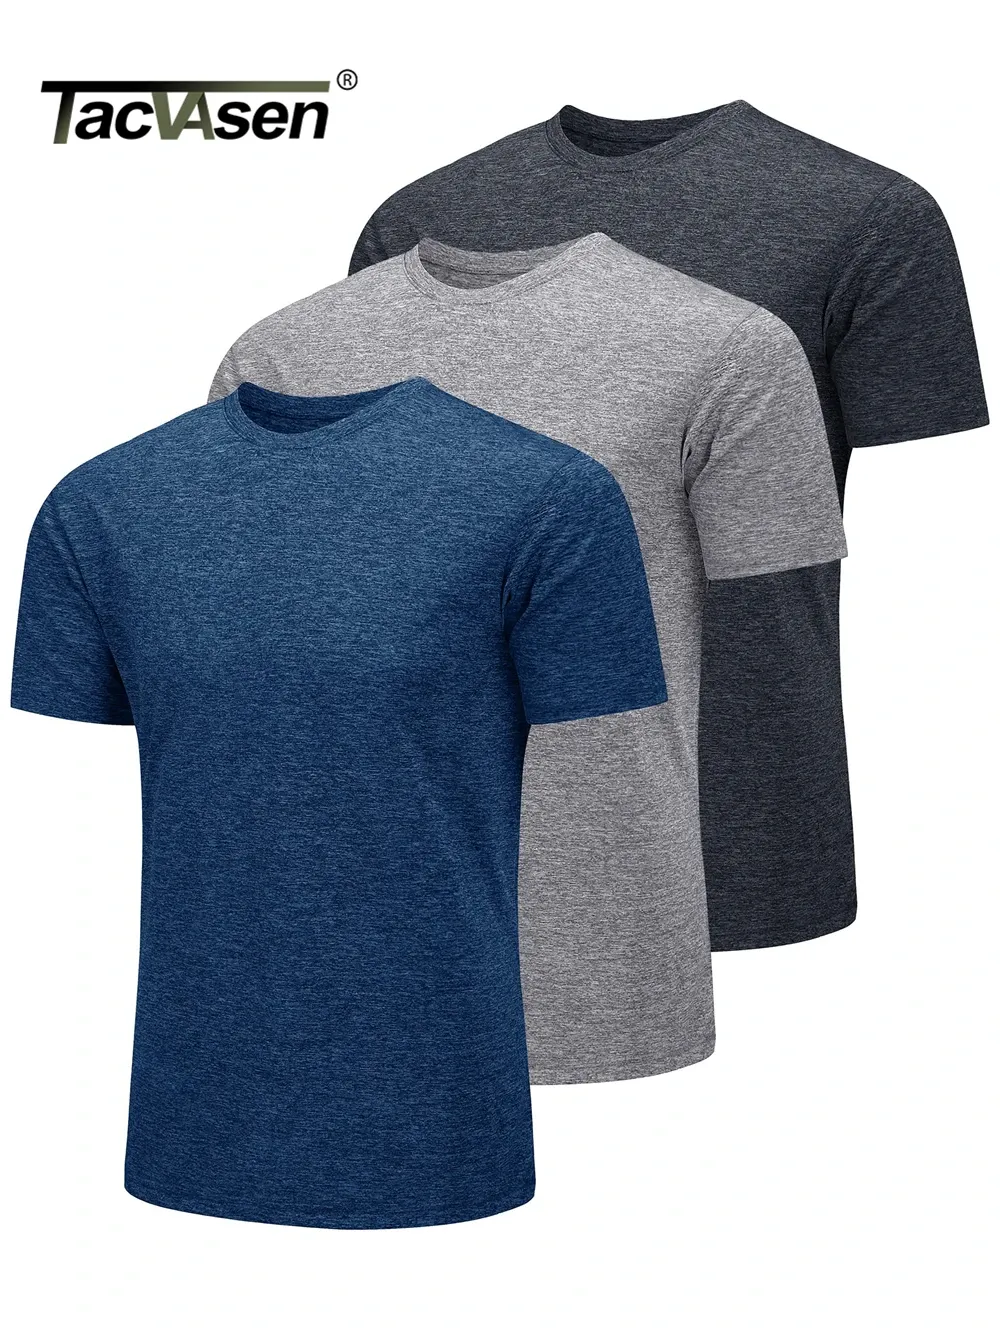 Shirts Tacvasen 3 Packs Summer Tshirts Mens Crew Neck Short Sleeve Shirts 3 Pieces/lot Moisture Wicking Quick Dry Casual Tees Gym Tops